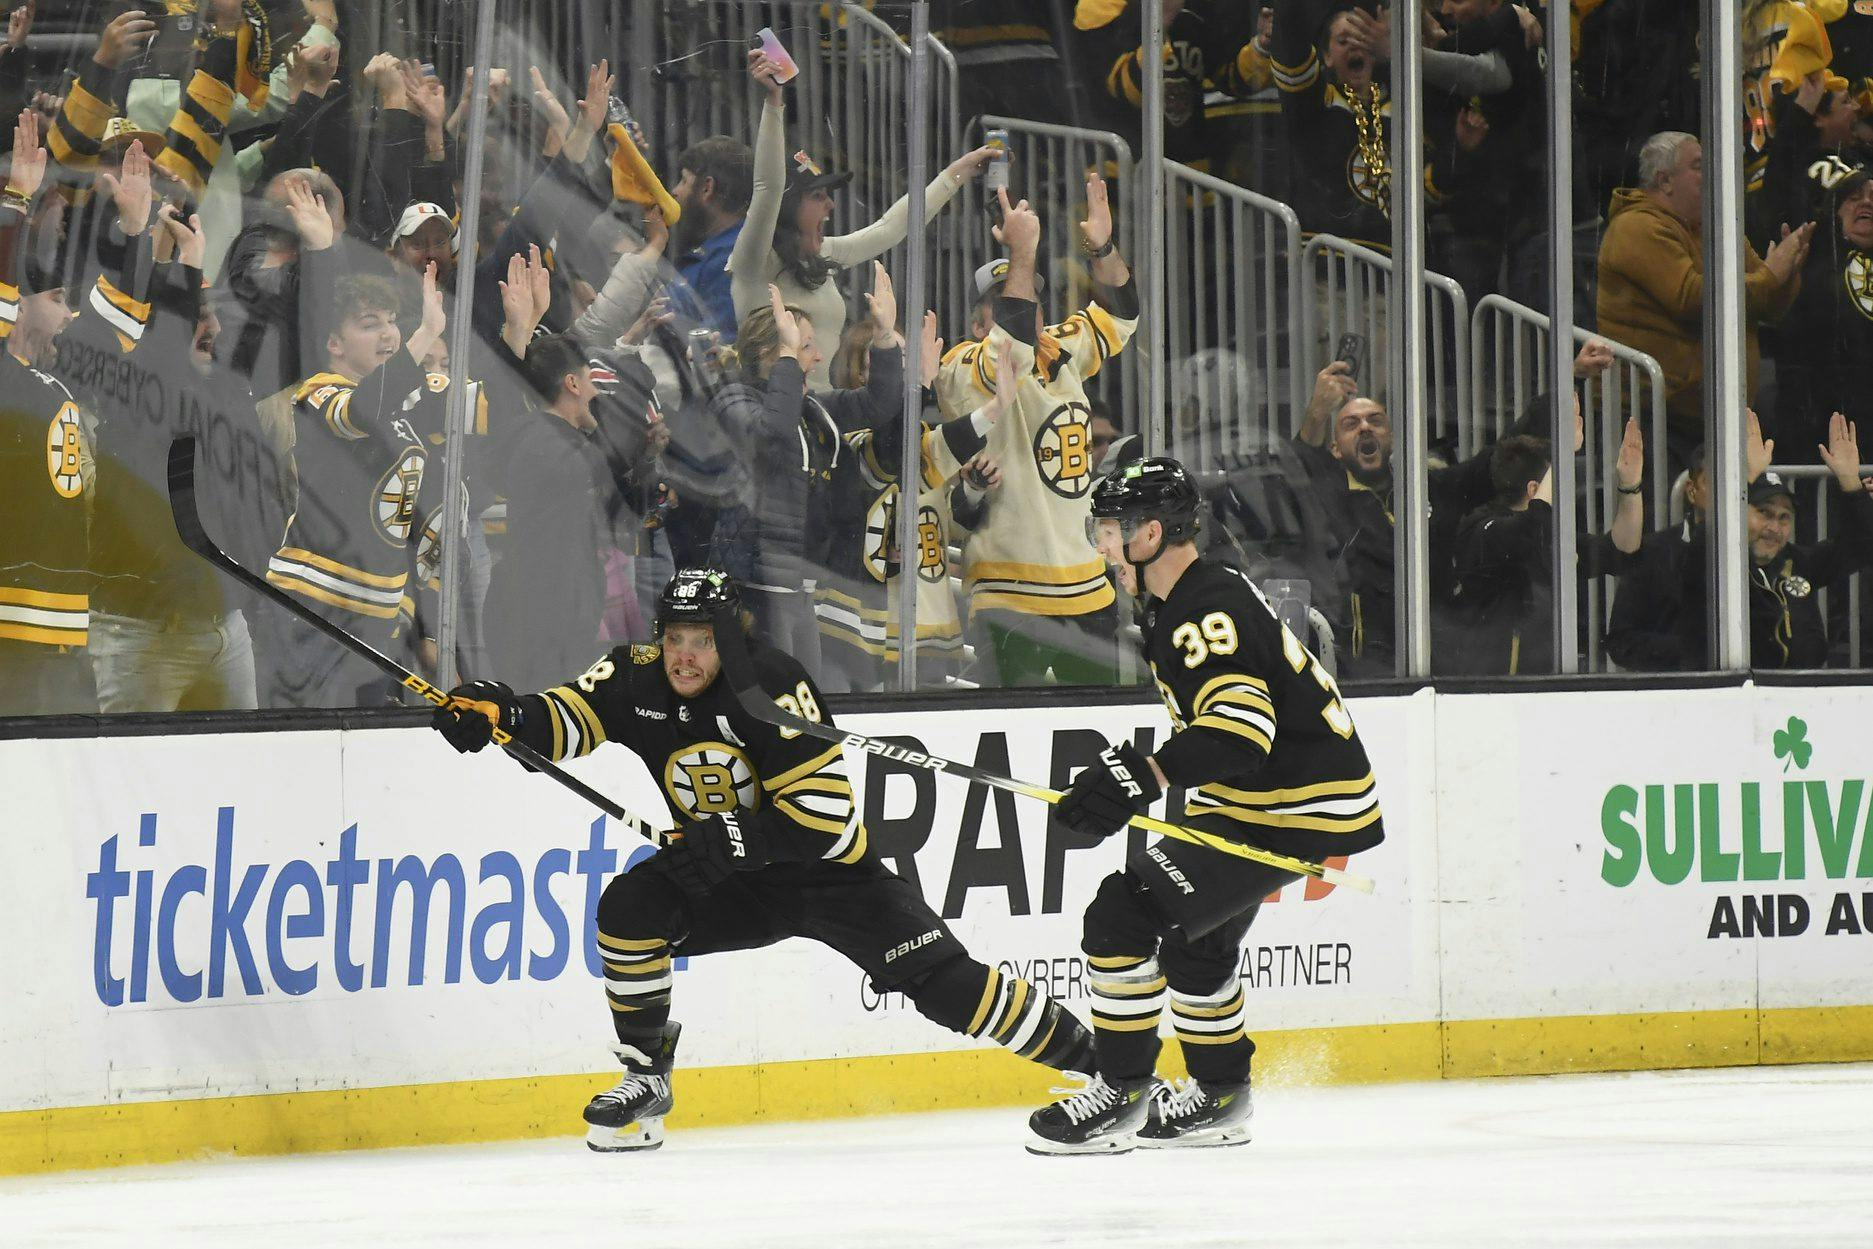 Stanley Cup Playoffs Day 15: Pastrnak’s OT winner ends tight Game 7 and sends Bruins to second round